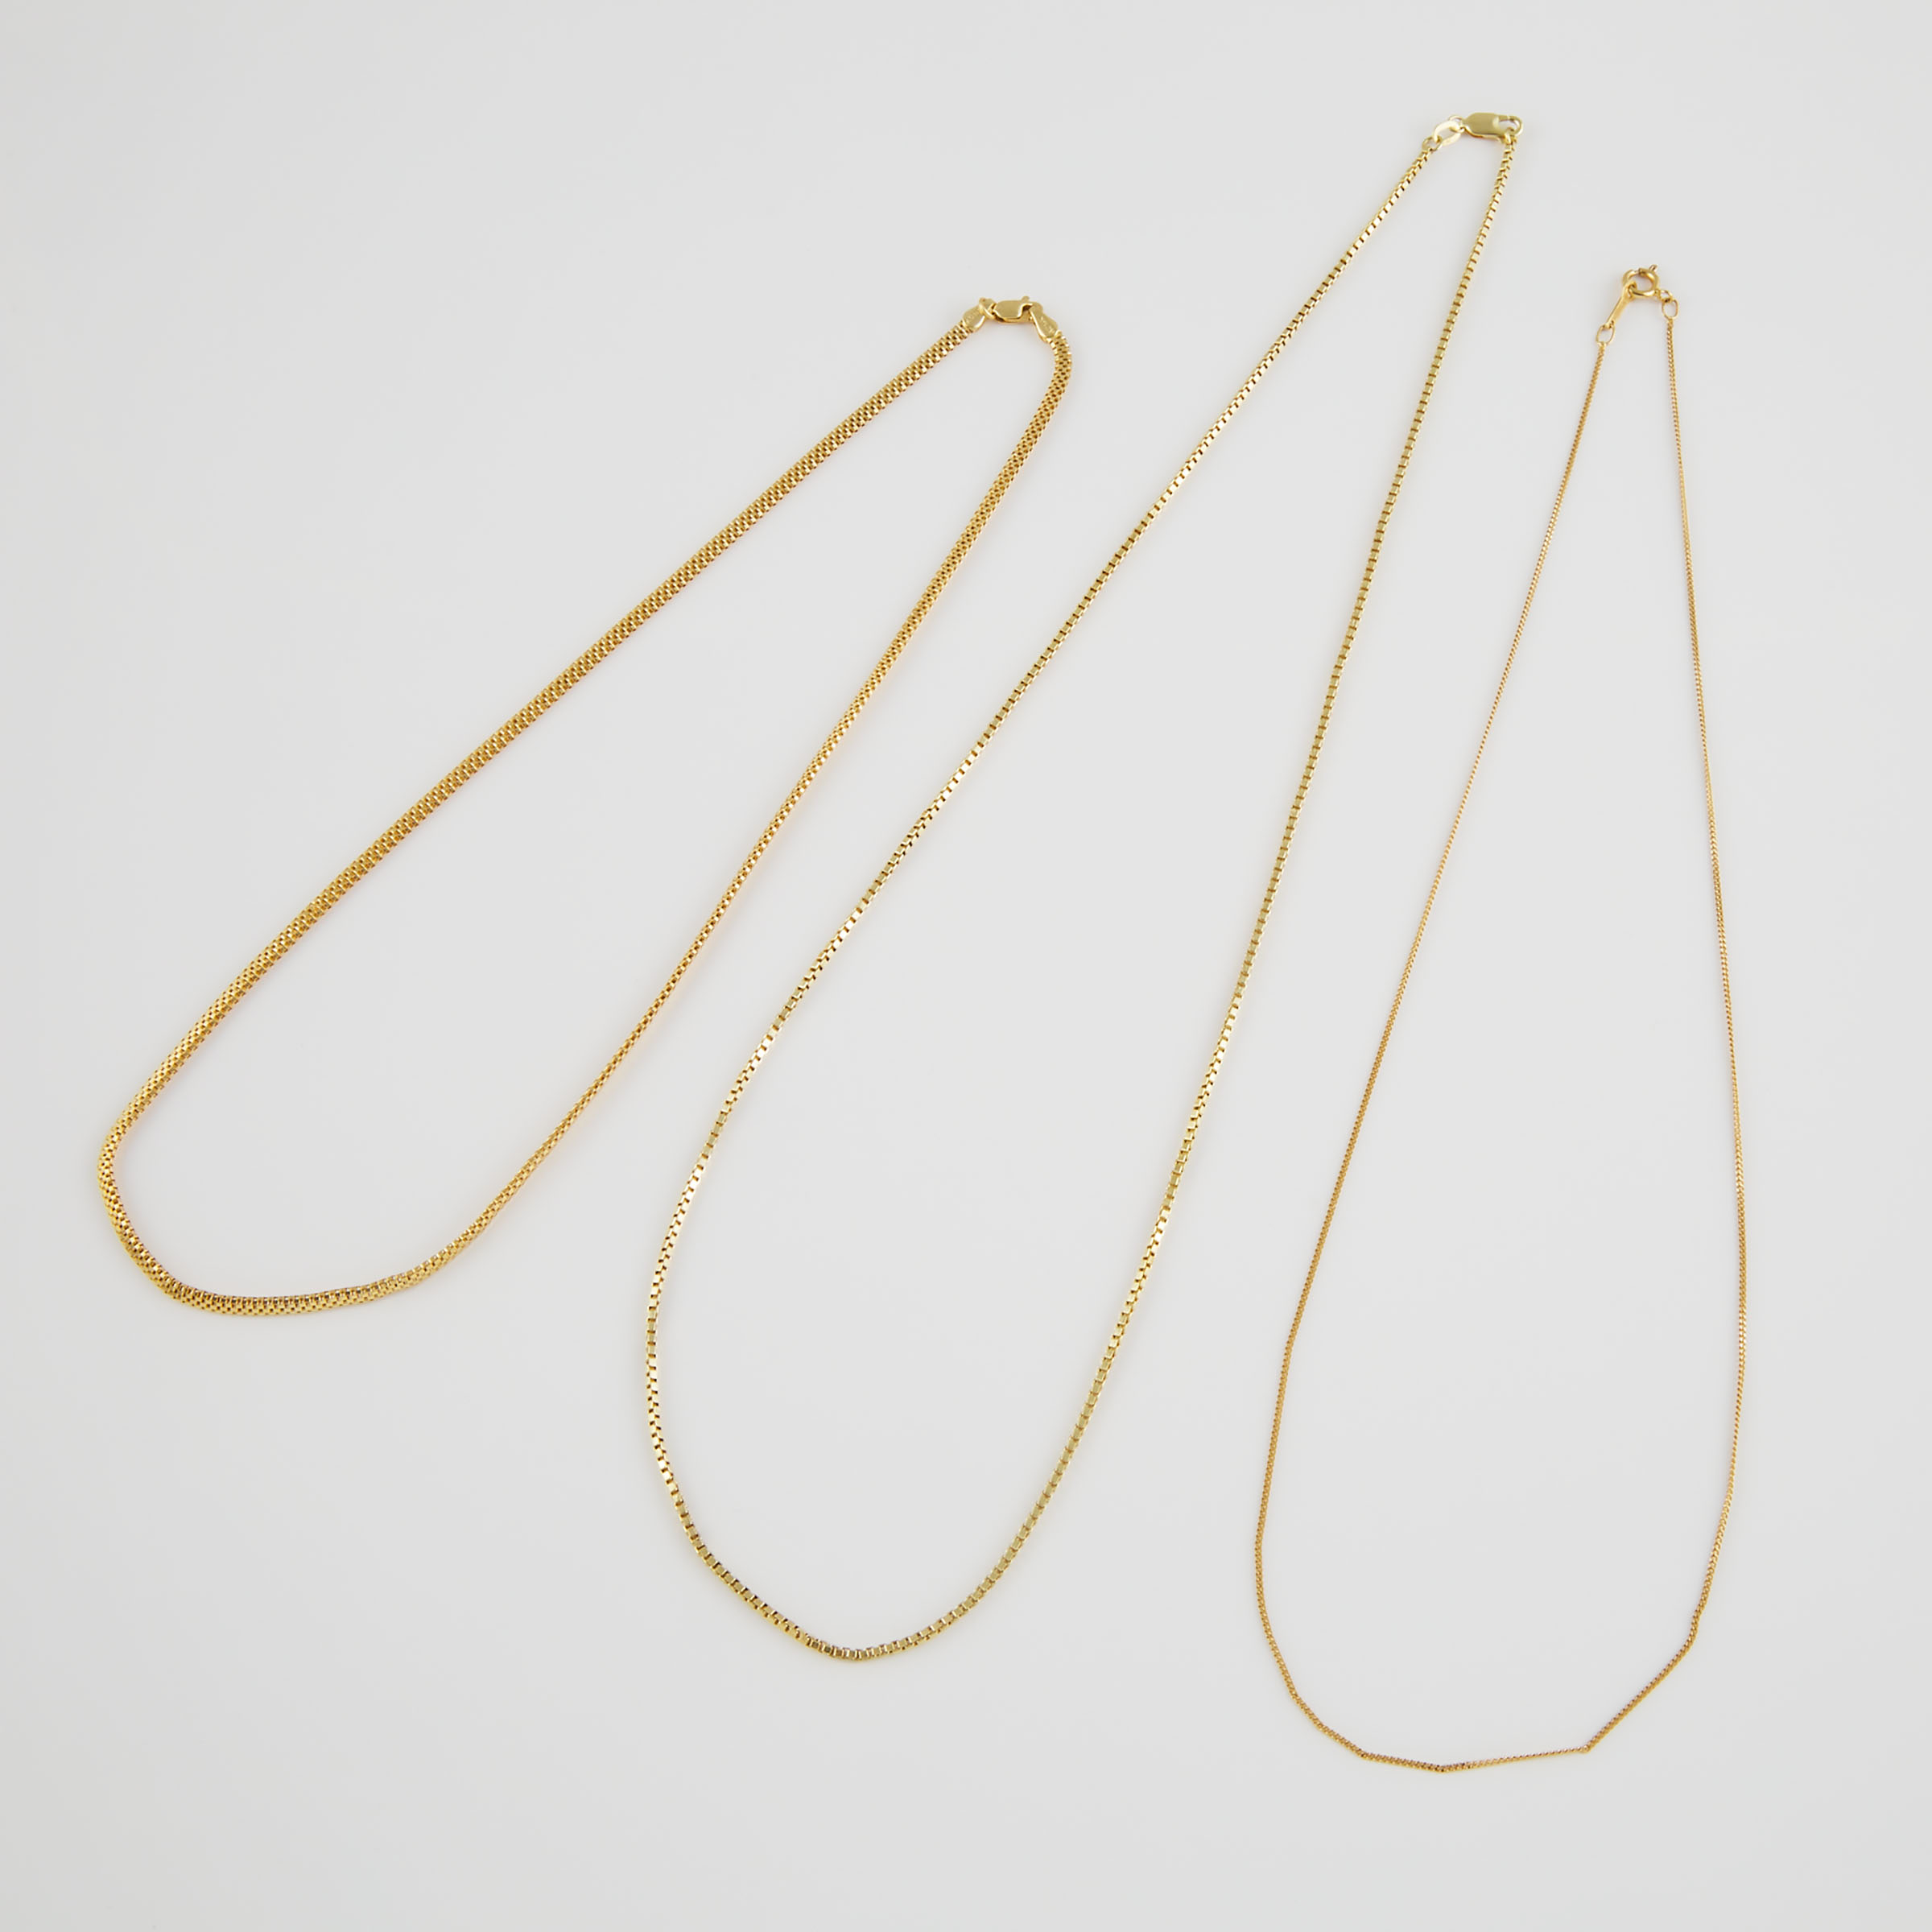 1 x 18k And 2 x 14k Yellow Gold Chains